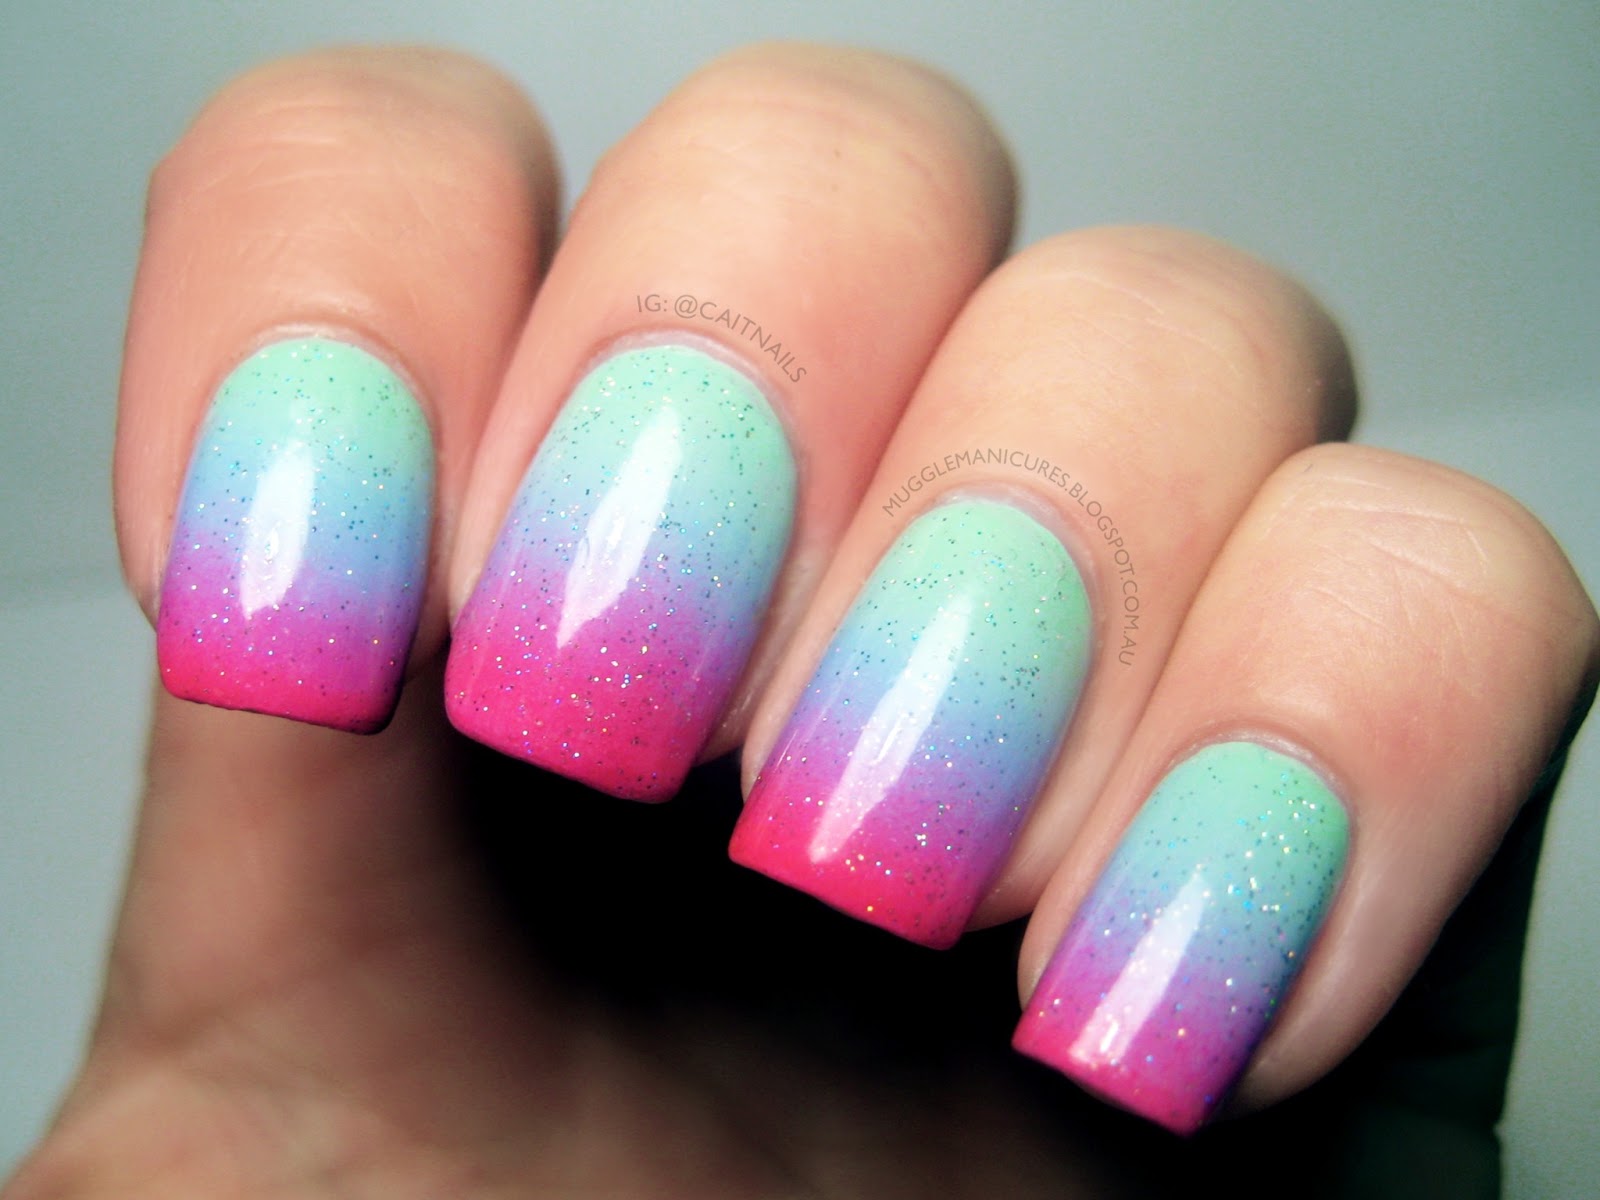 4. Simply Nailogical's Top Tips for Creating Stunning Gradient Nail Art - wide 5